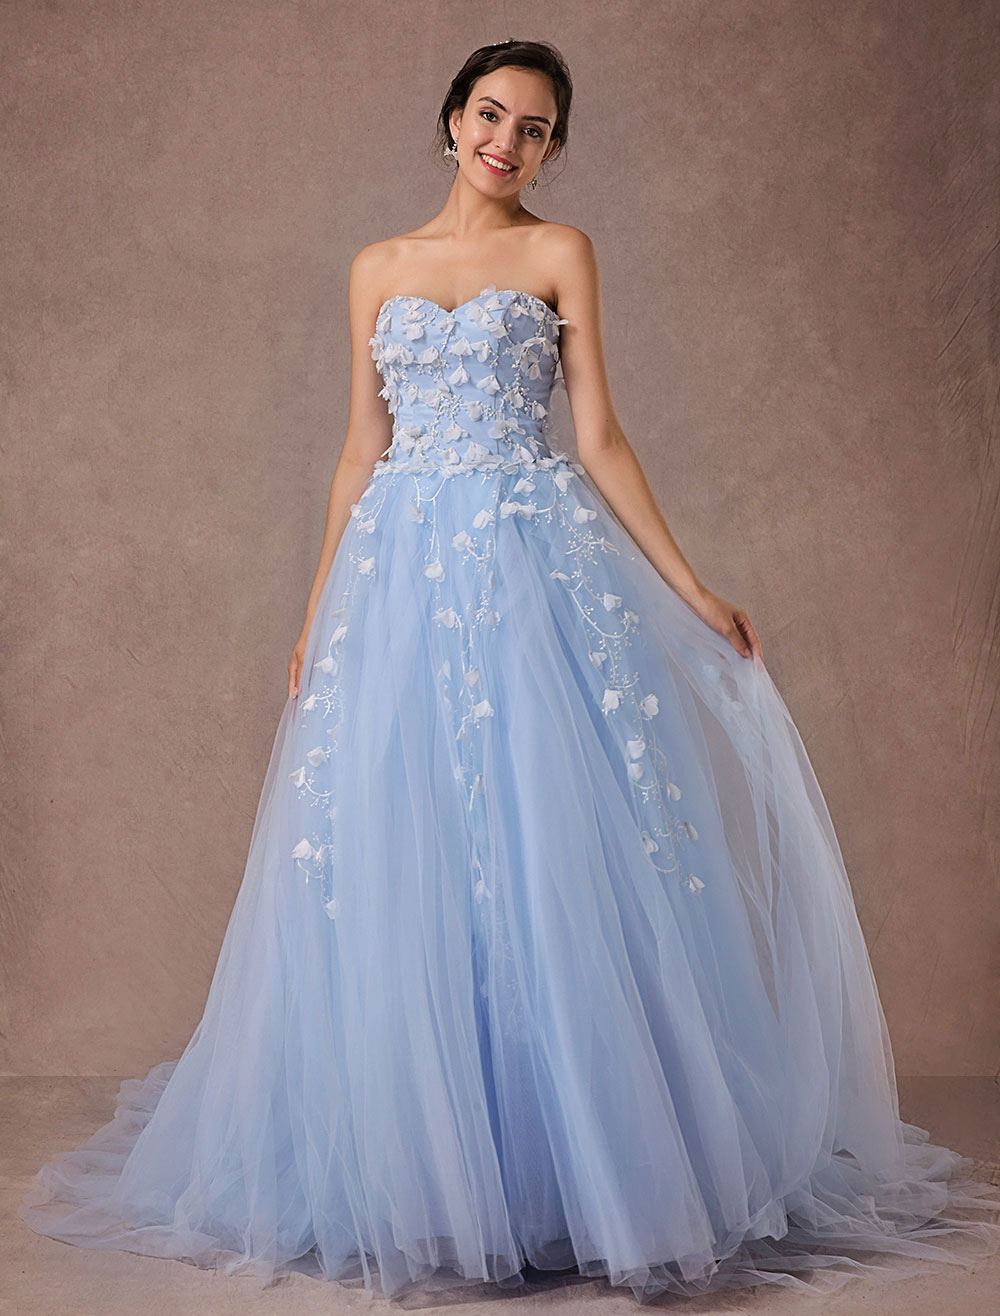 Blue Wedding Dress Lace Tulle Chapel Train Bridal Gown Sweetheart ...